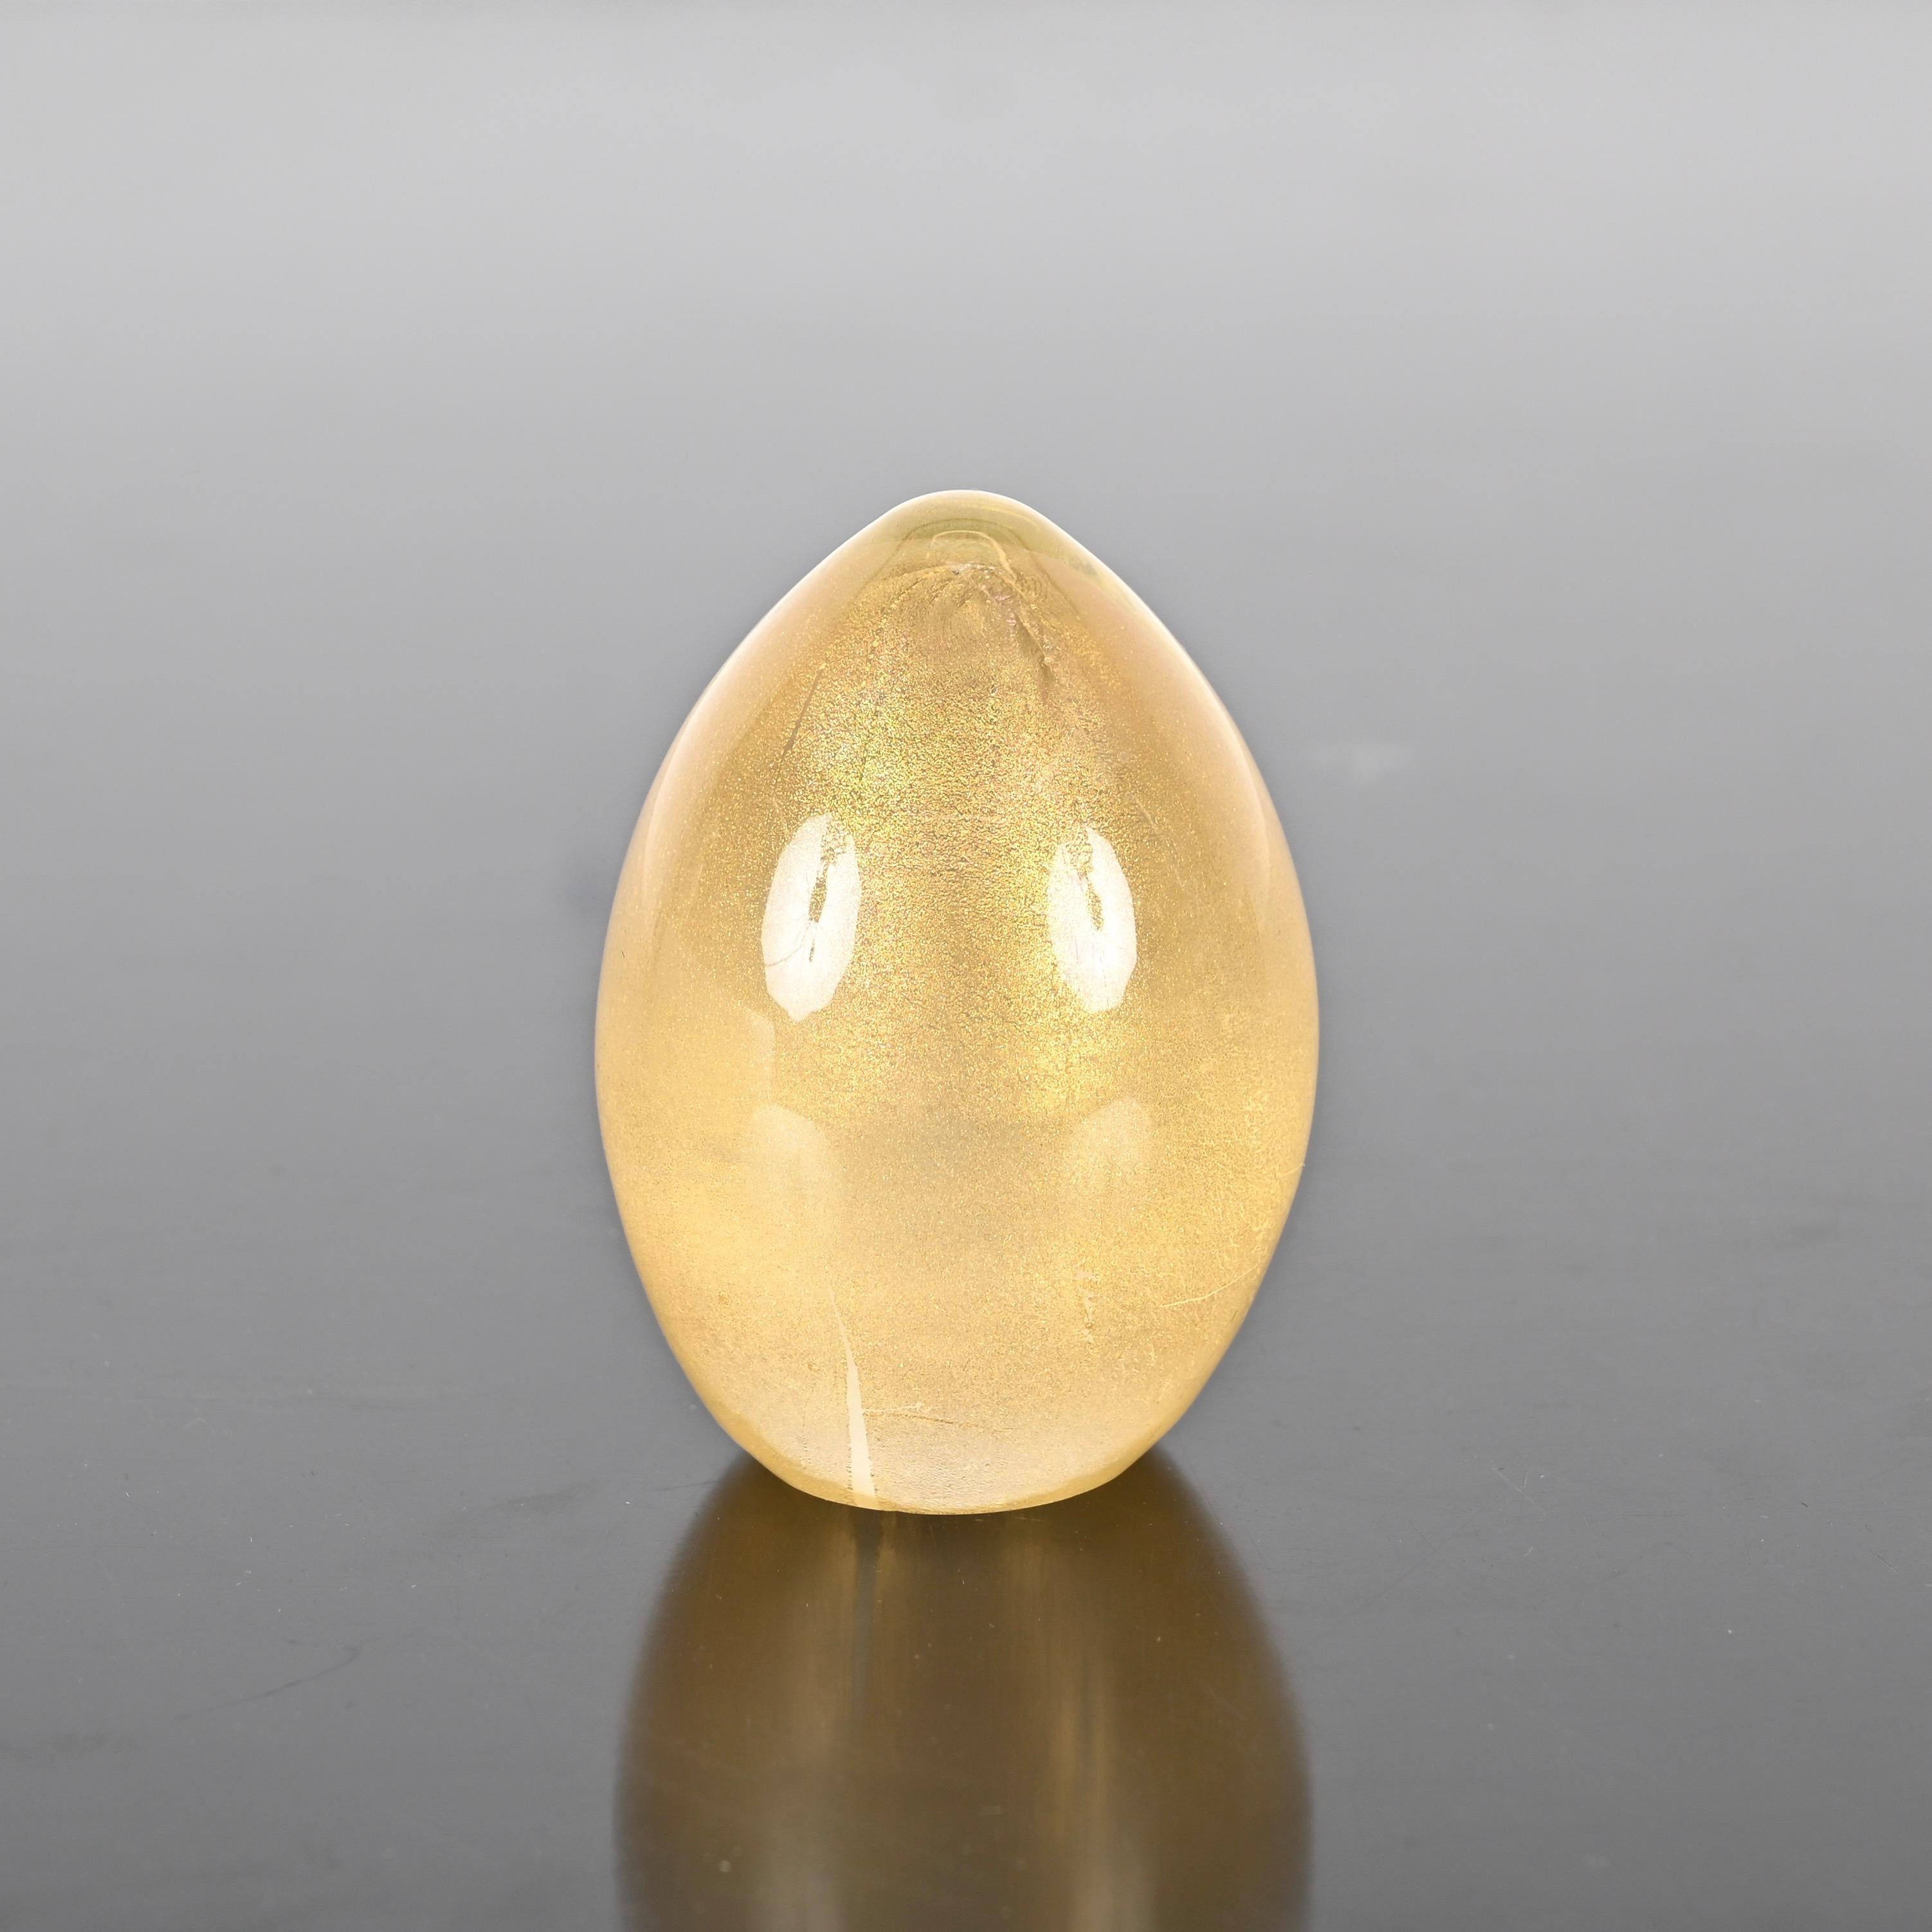 Seguso Murano Egg Paperweight in Murano Glass with Gold Dust, Italy 1950s For Sale 2